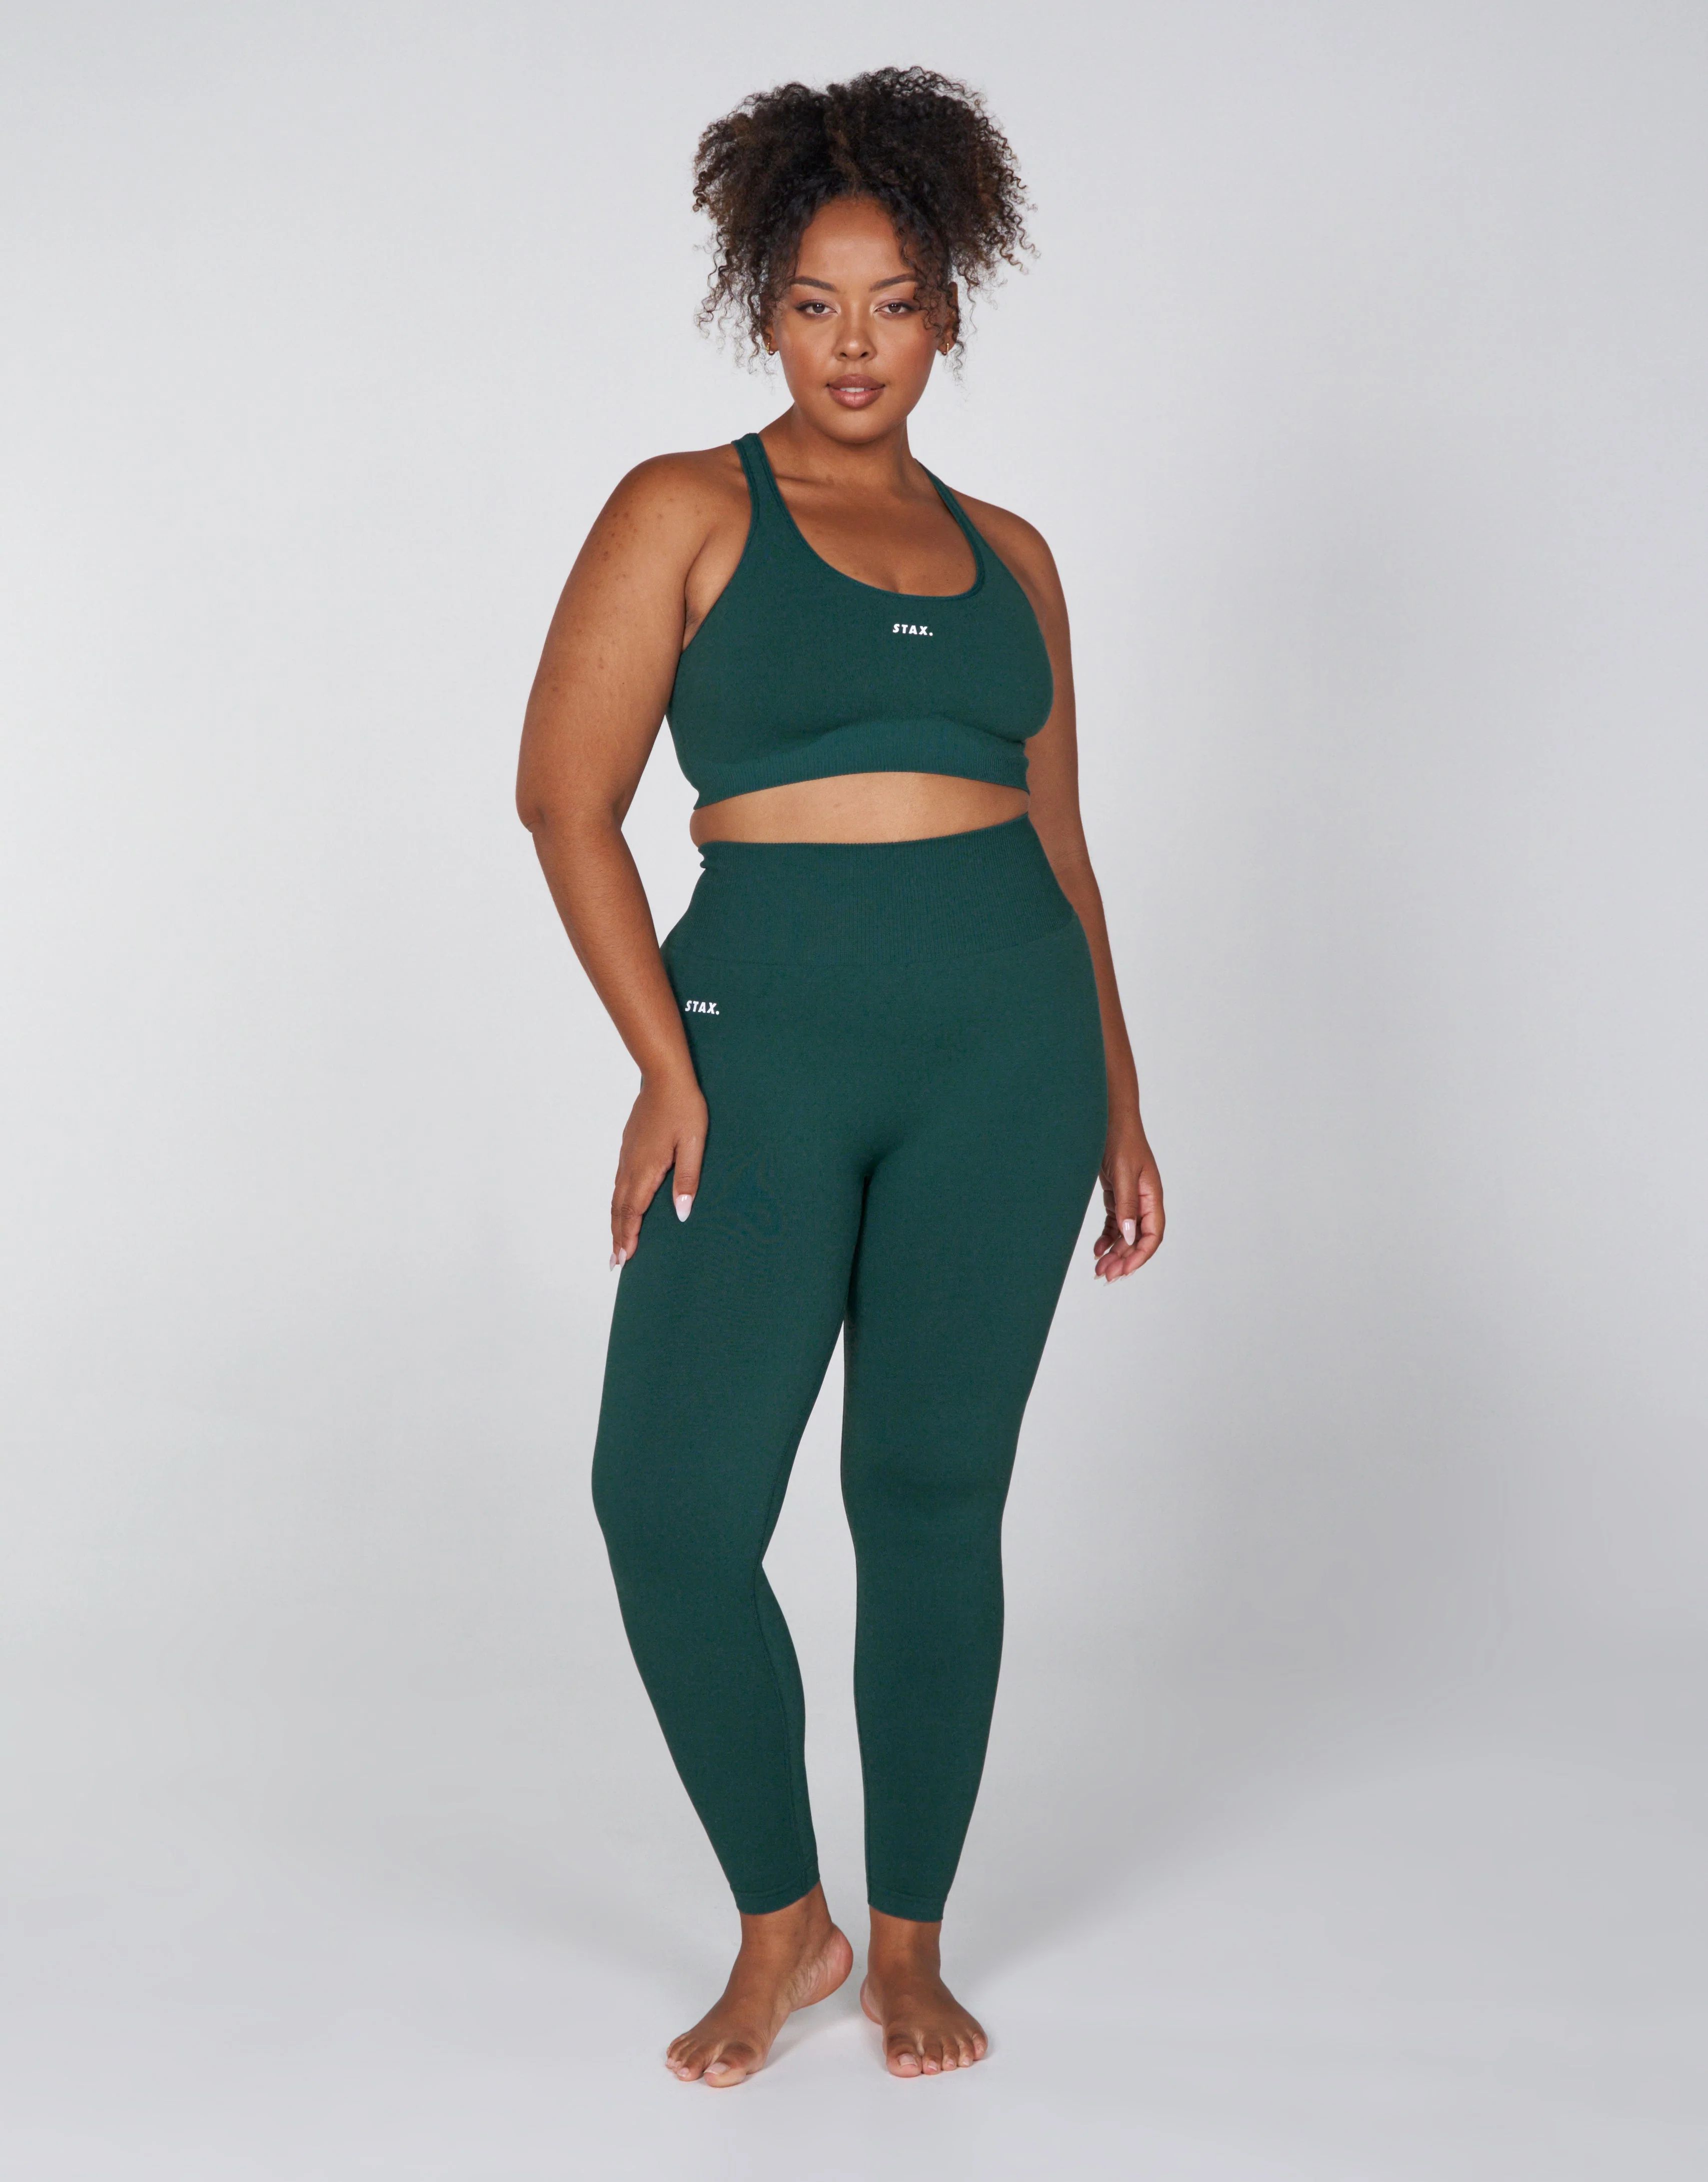 STAX. PSF Full Length Tights - Pine | STAX.